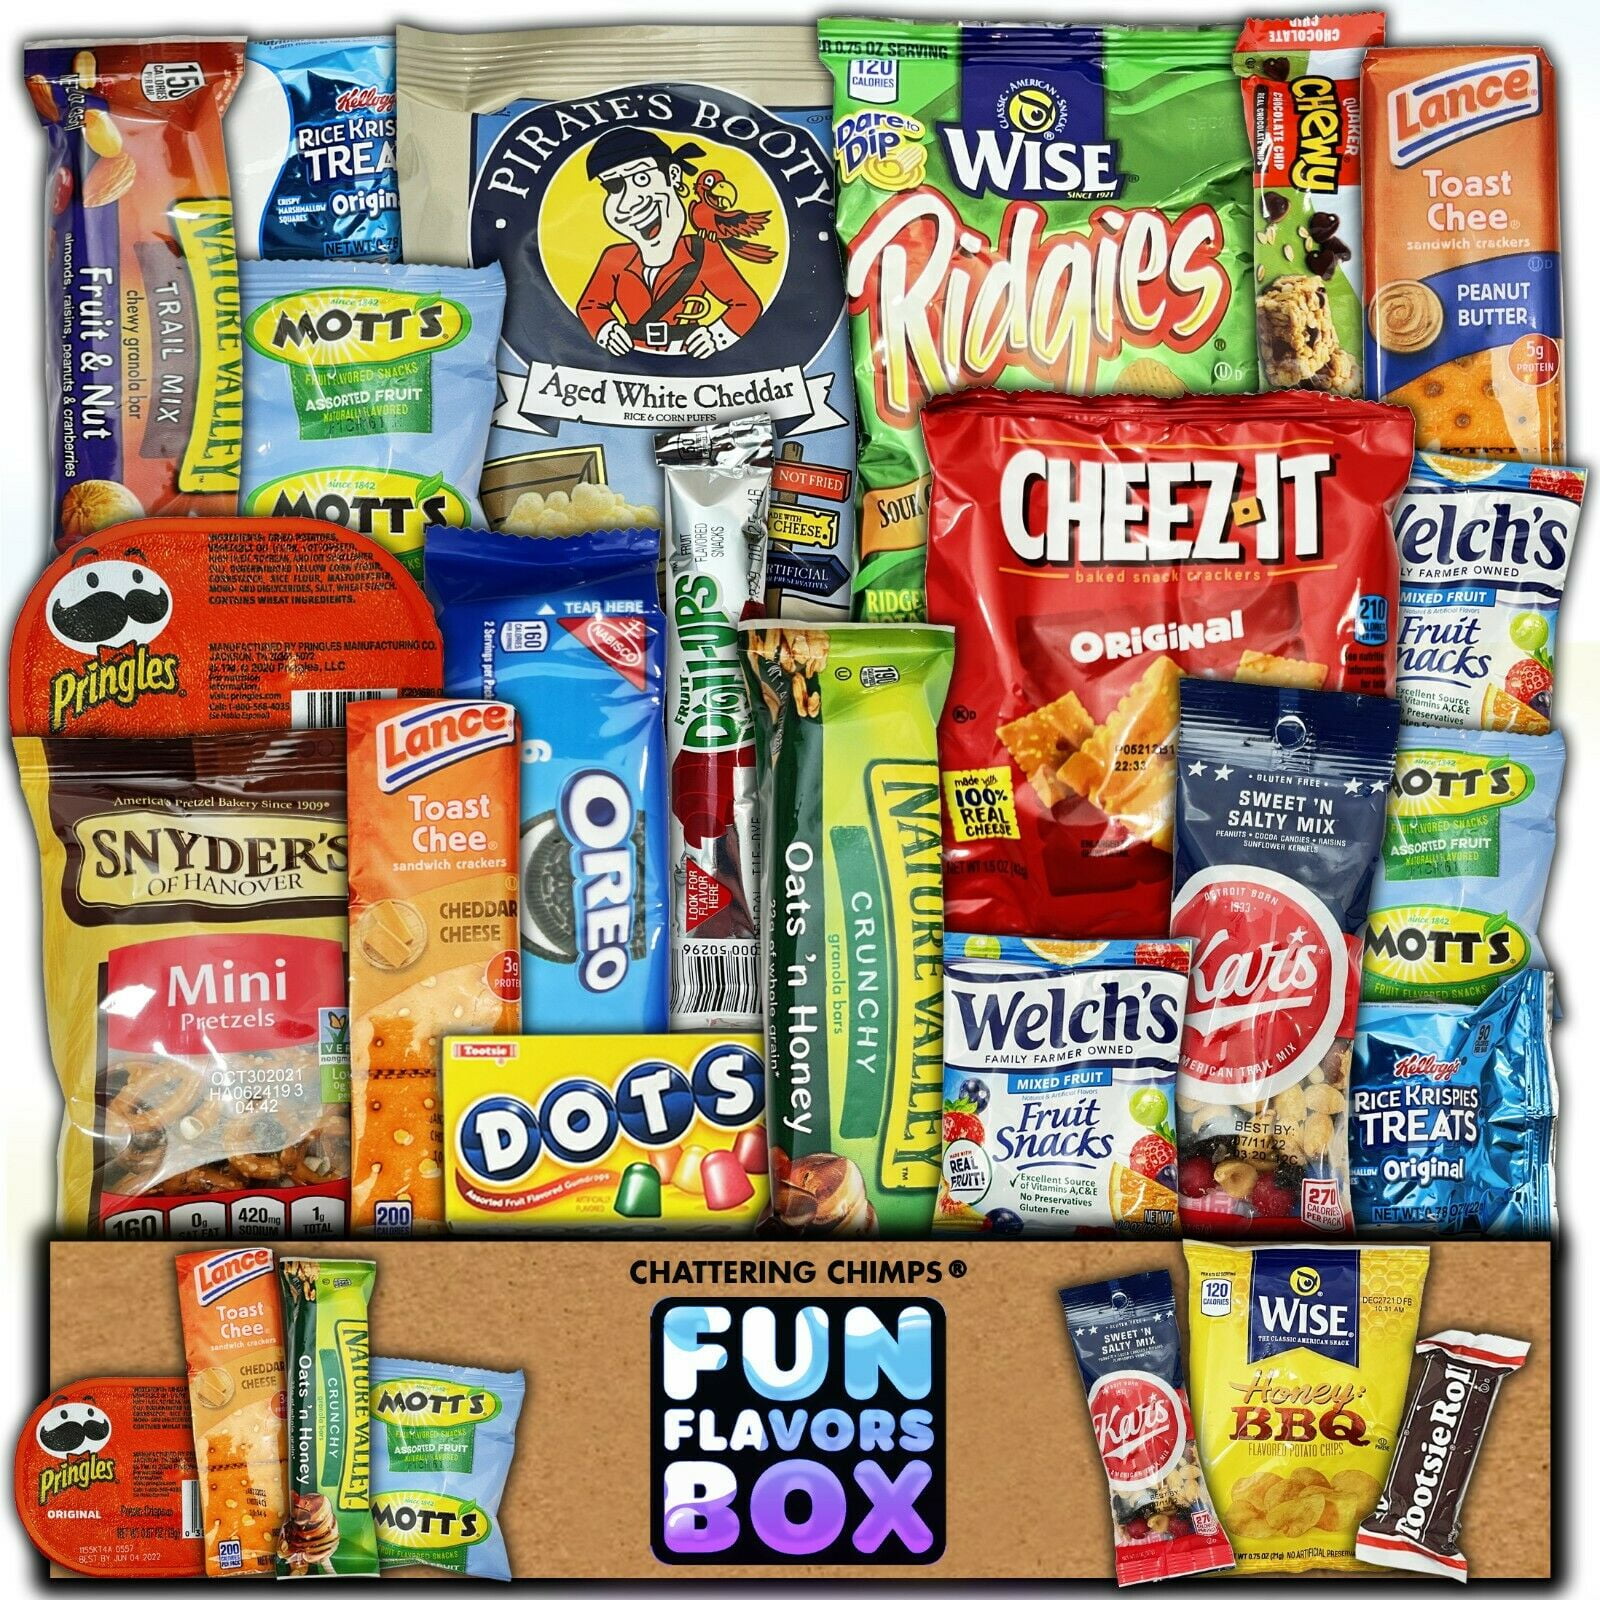 Fun Flavors Box Favorite American Snack Sampler Care Package - 20 Snacks  Variety Assortment of Chips, Cookies, Candy, Bars, Favorite Snacks Gift Box